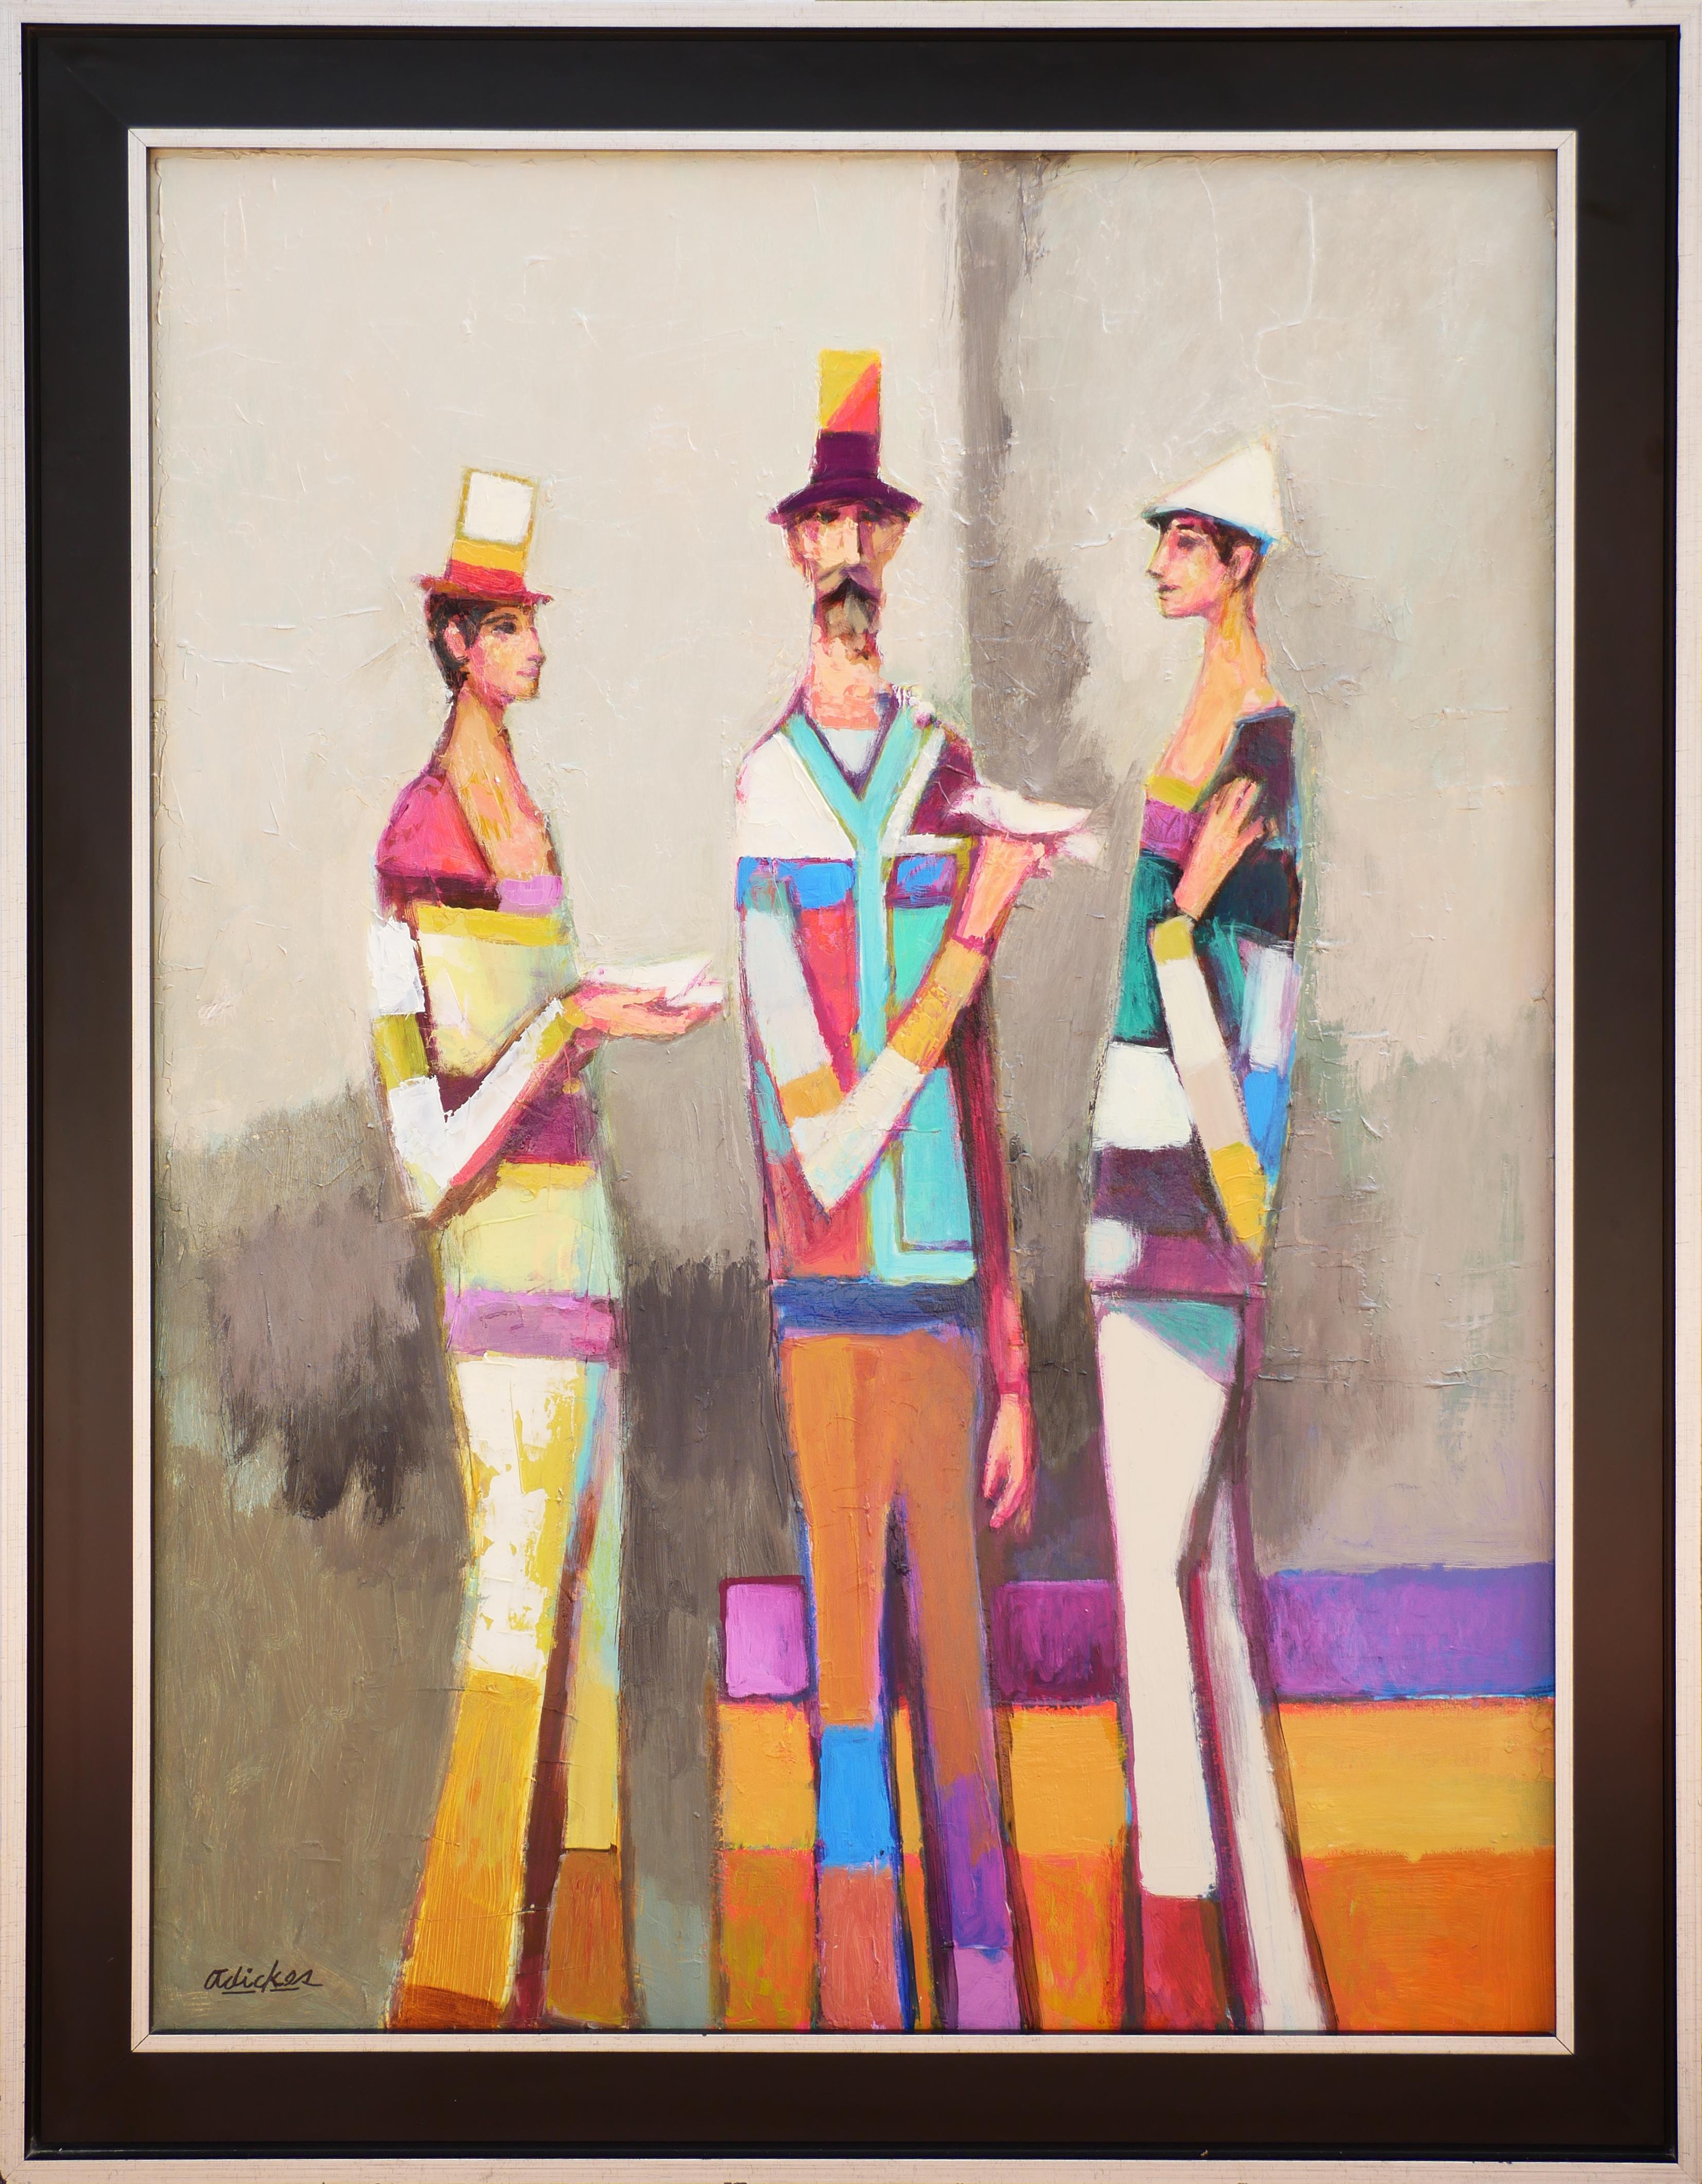 David Adickes Figurative Painting - "Three Guys, Two Birds" Modern Abstract Colorful Figurative Portrait Painting 